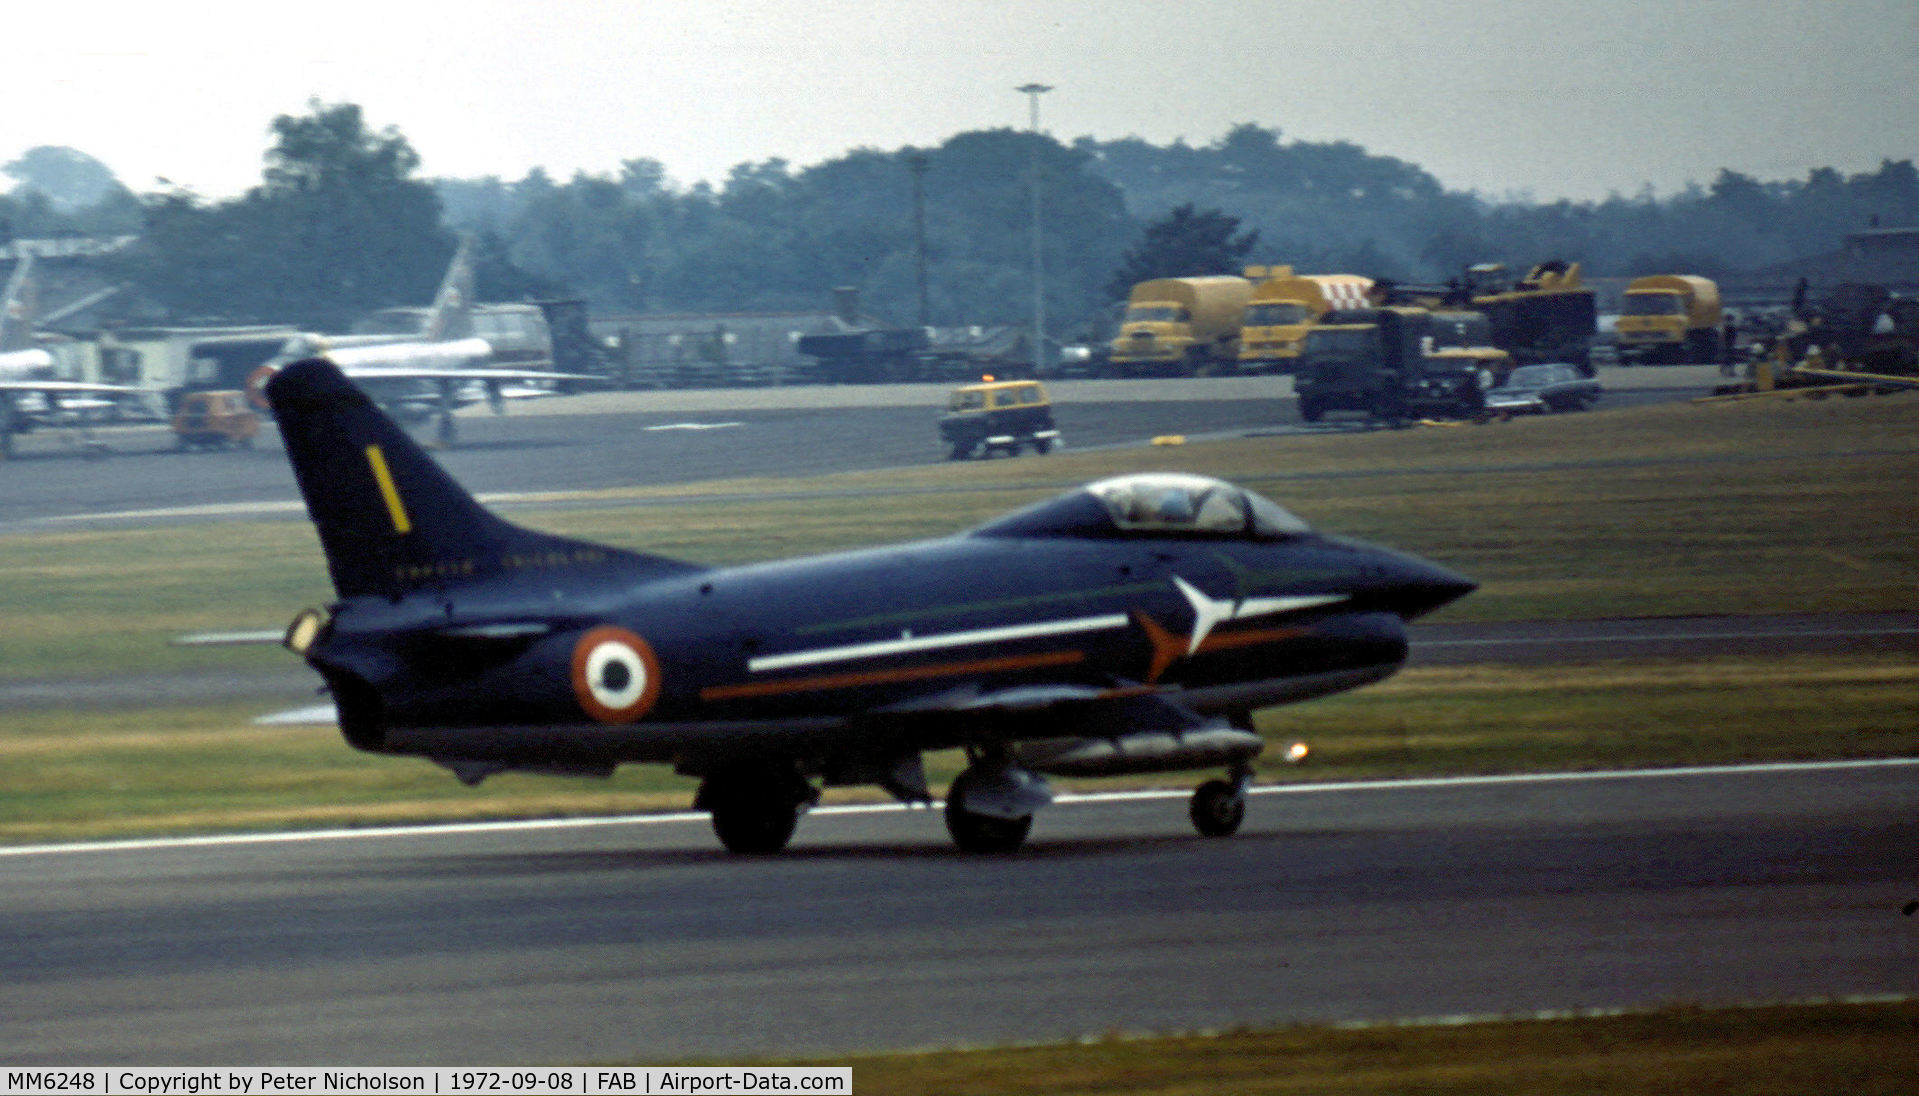 MM6248, Fiat G-91PAN C/N 14, Fiat G-91PAN number 1 of the Italian Air Force's Frecce Tricolori flight demonstration team in action at the 1972 Farnborough Airshow.